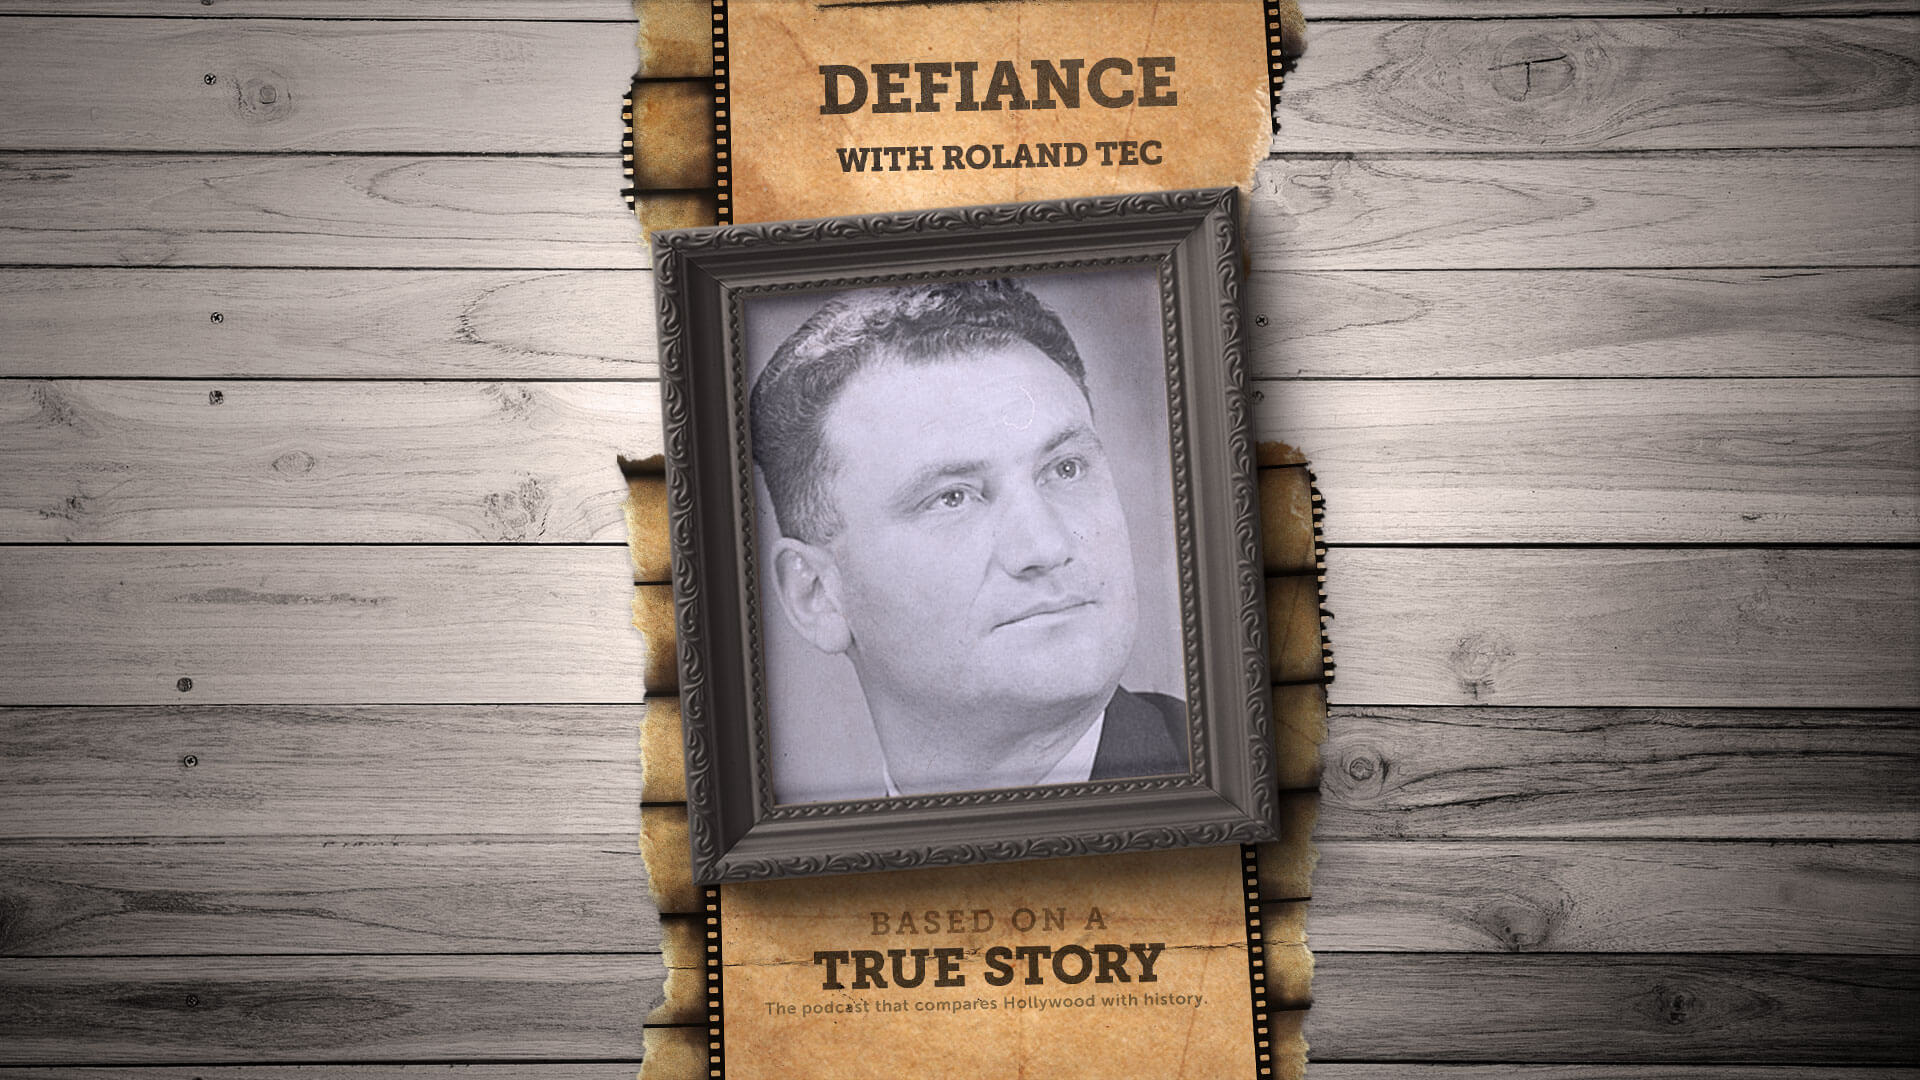 The true story of Defiance